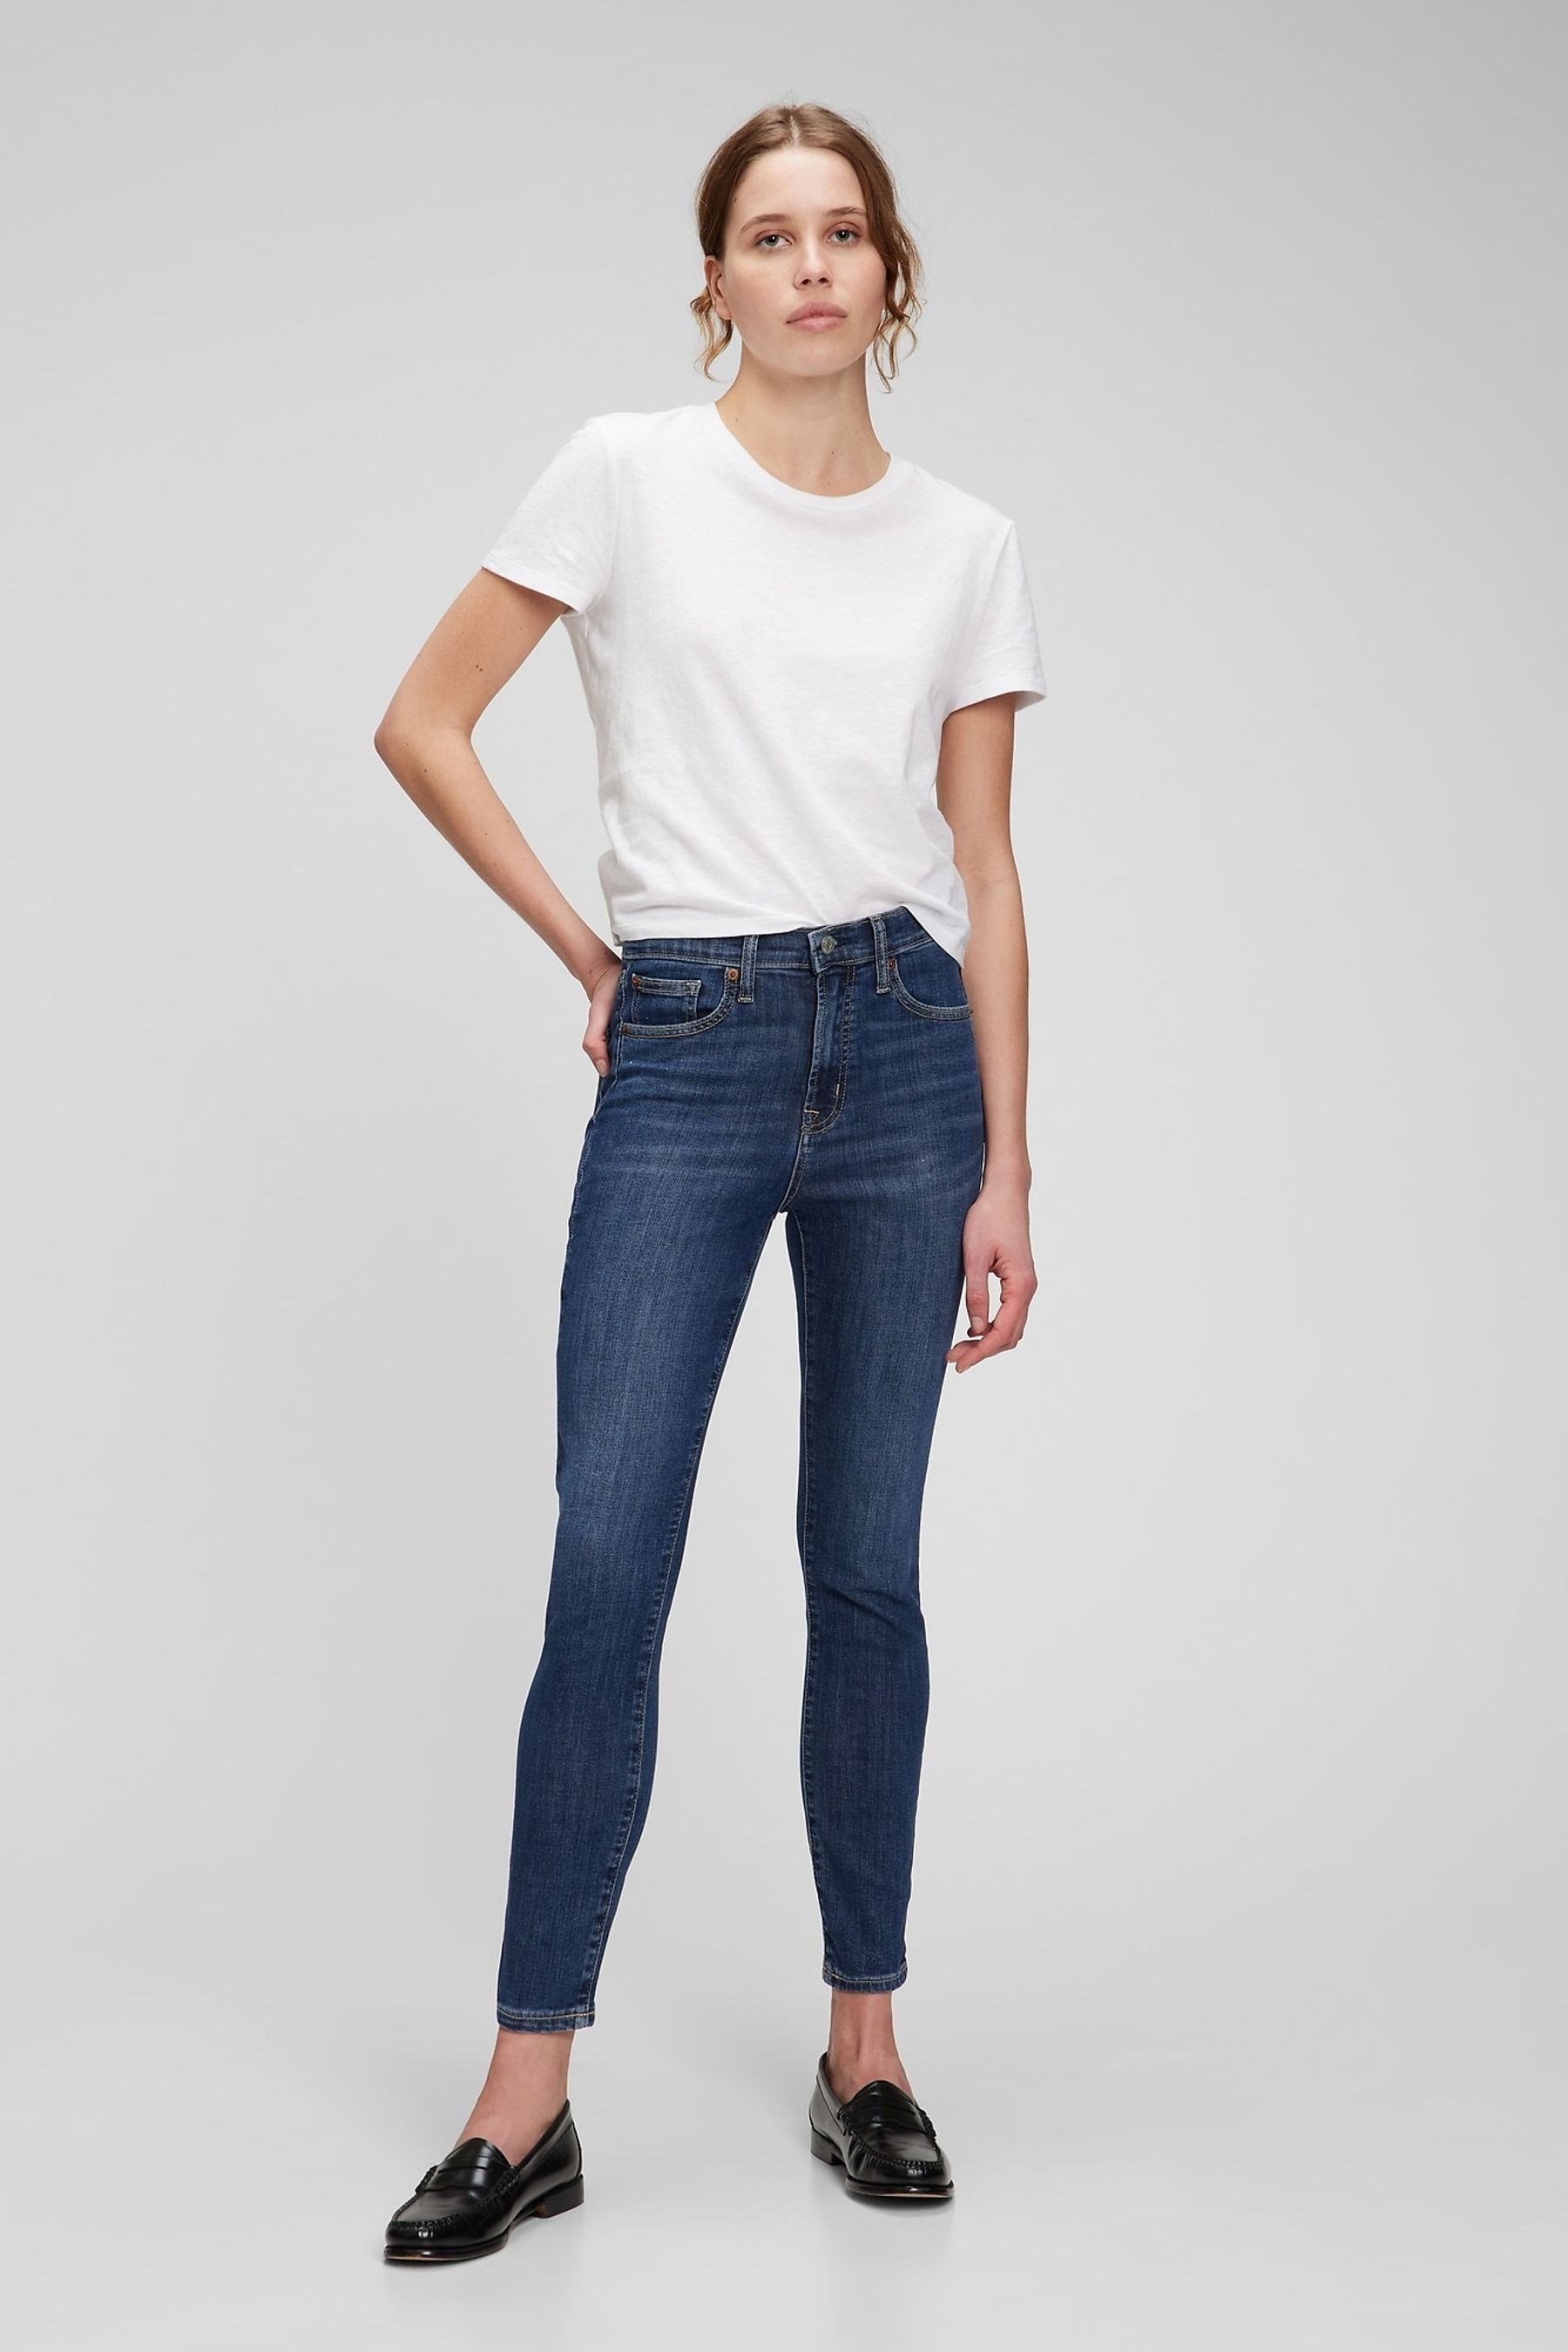 Buy Gap Blue High Waisted Skinny Fit Jeans from the Next UK online shop